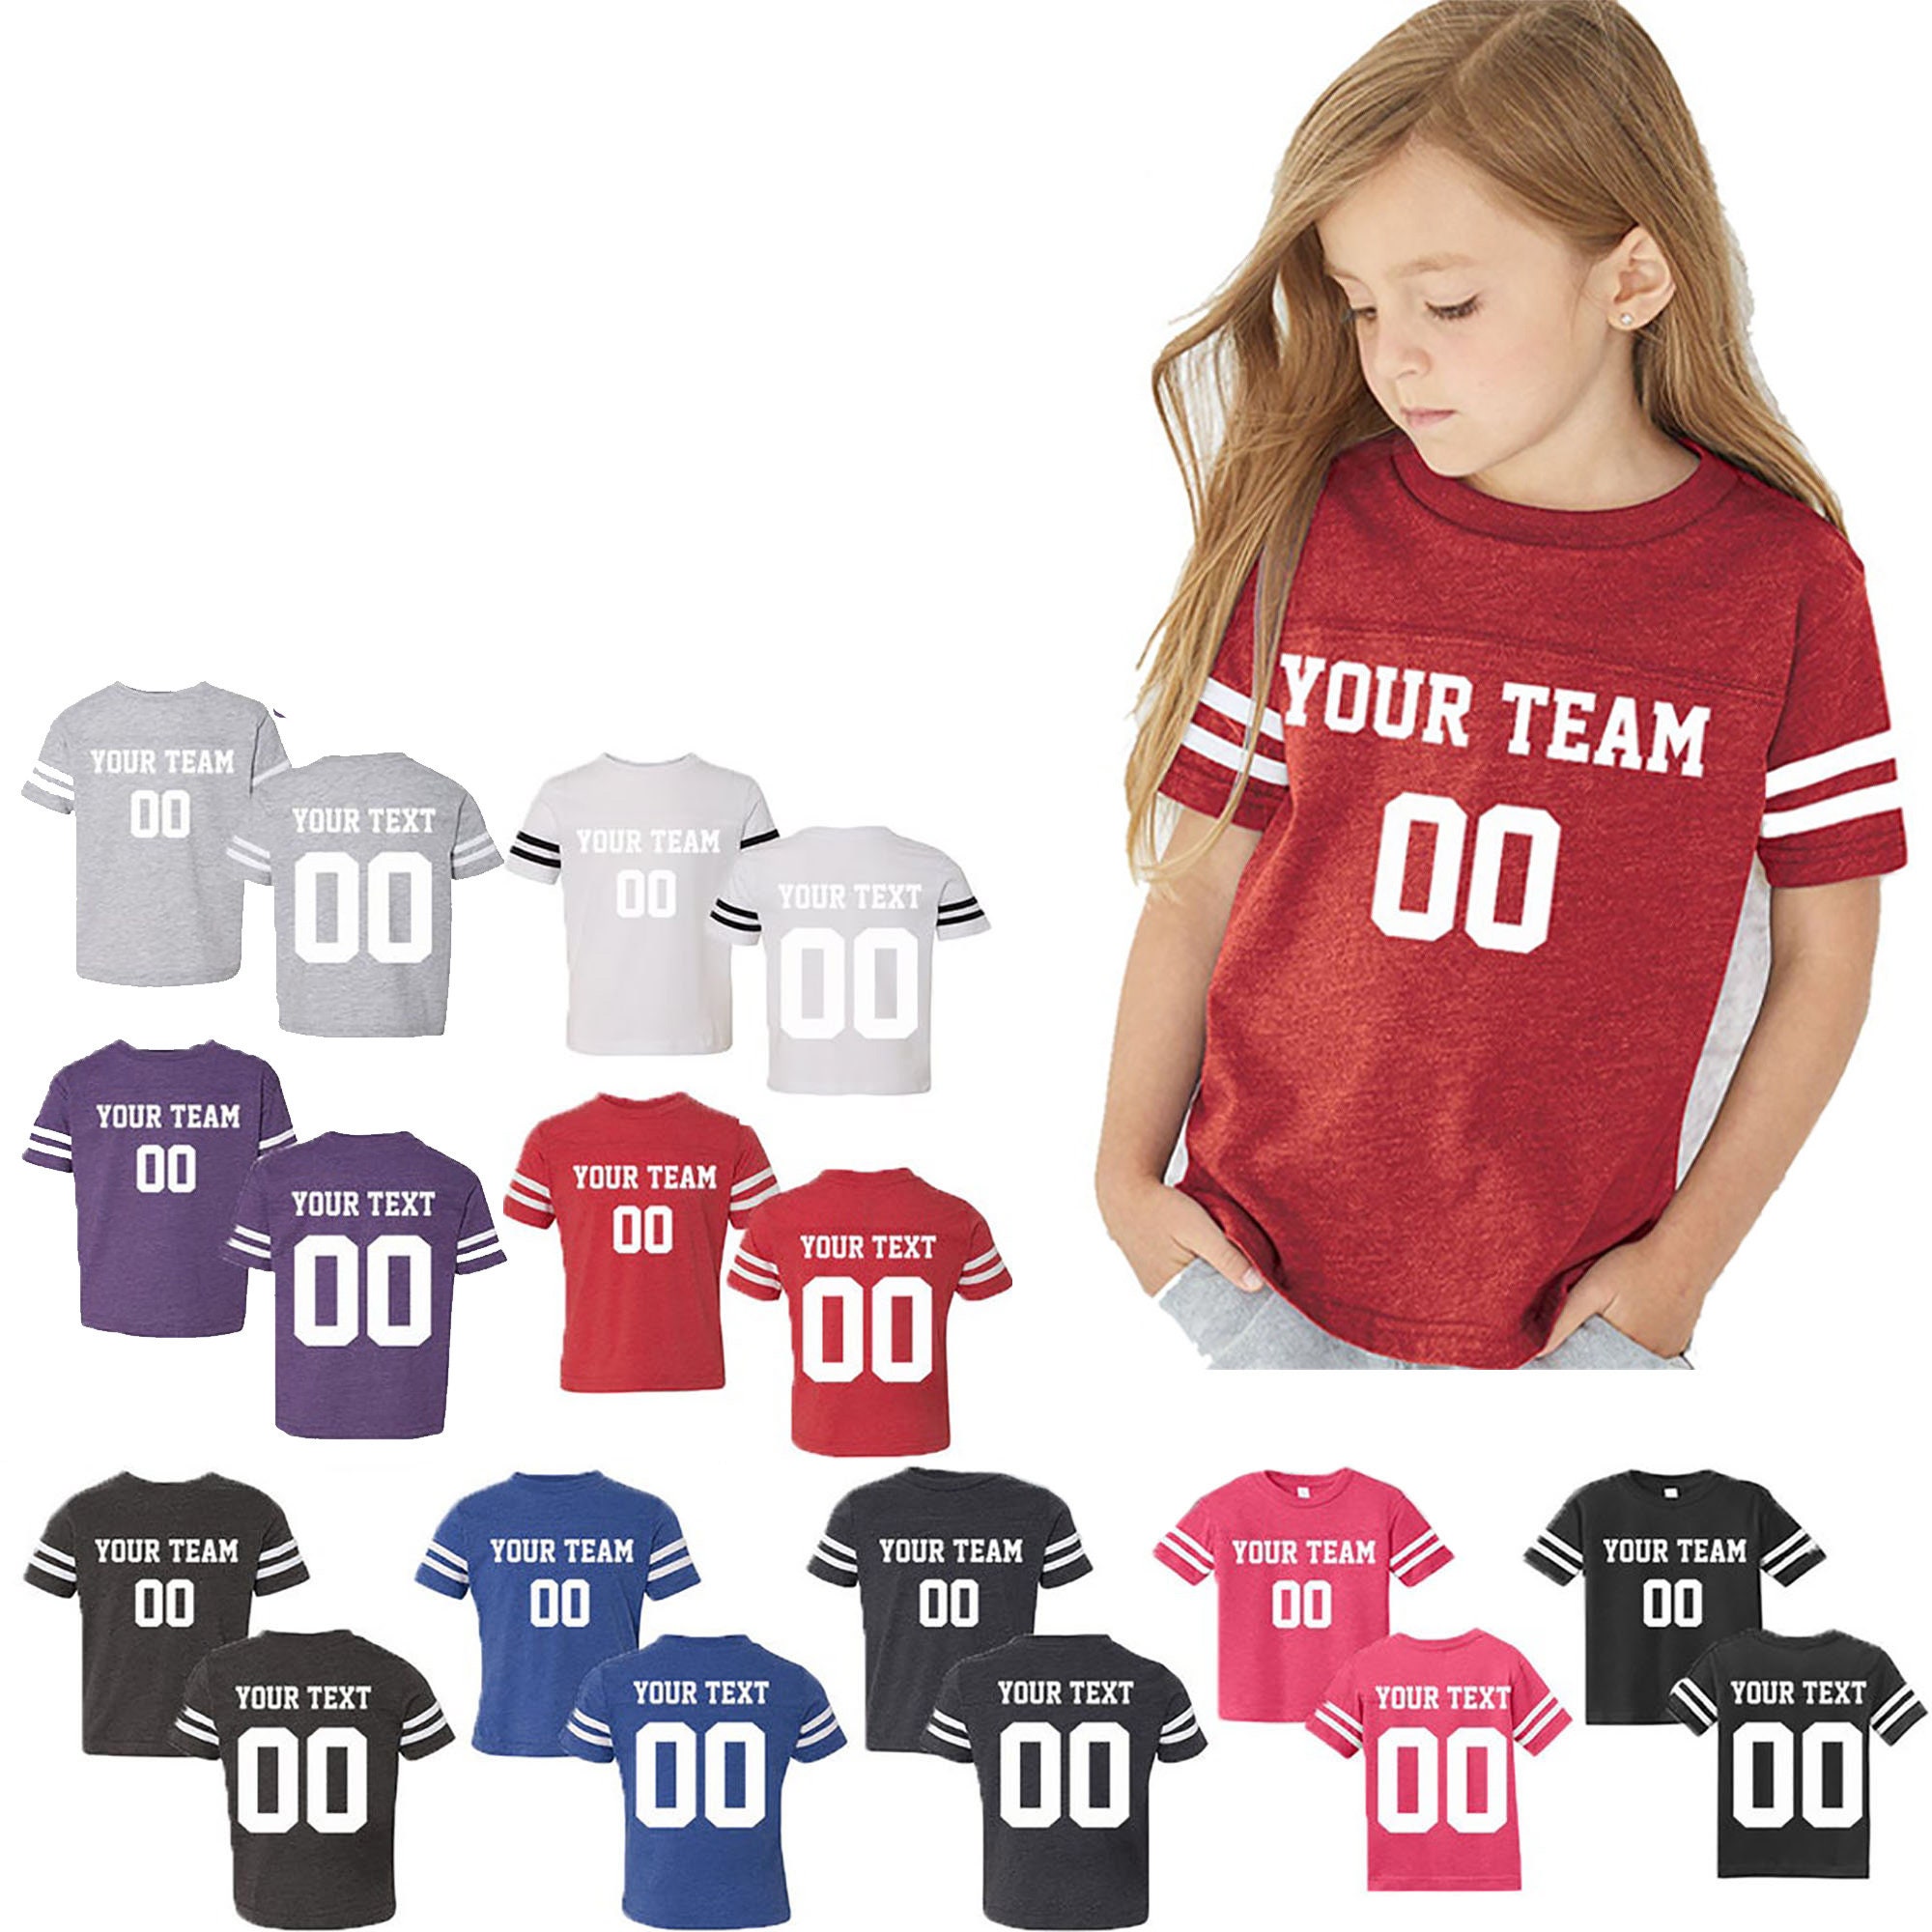 personalized children's football jersey